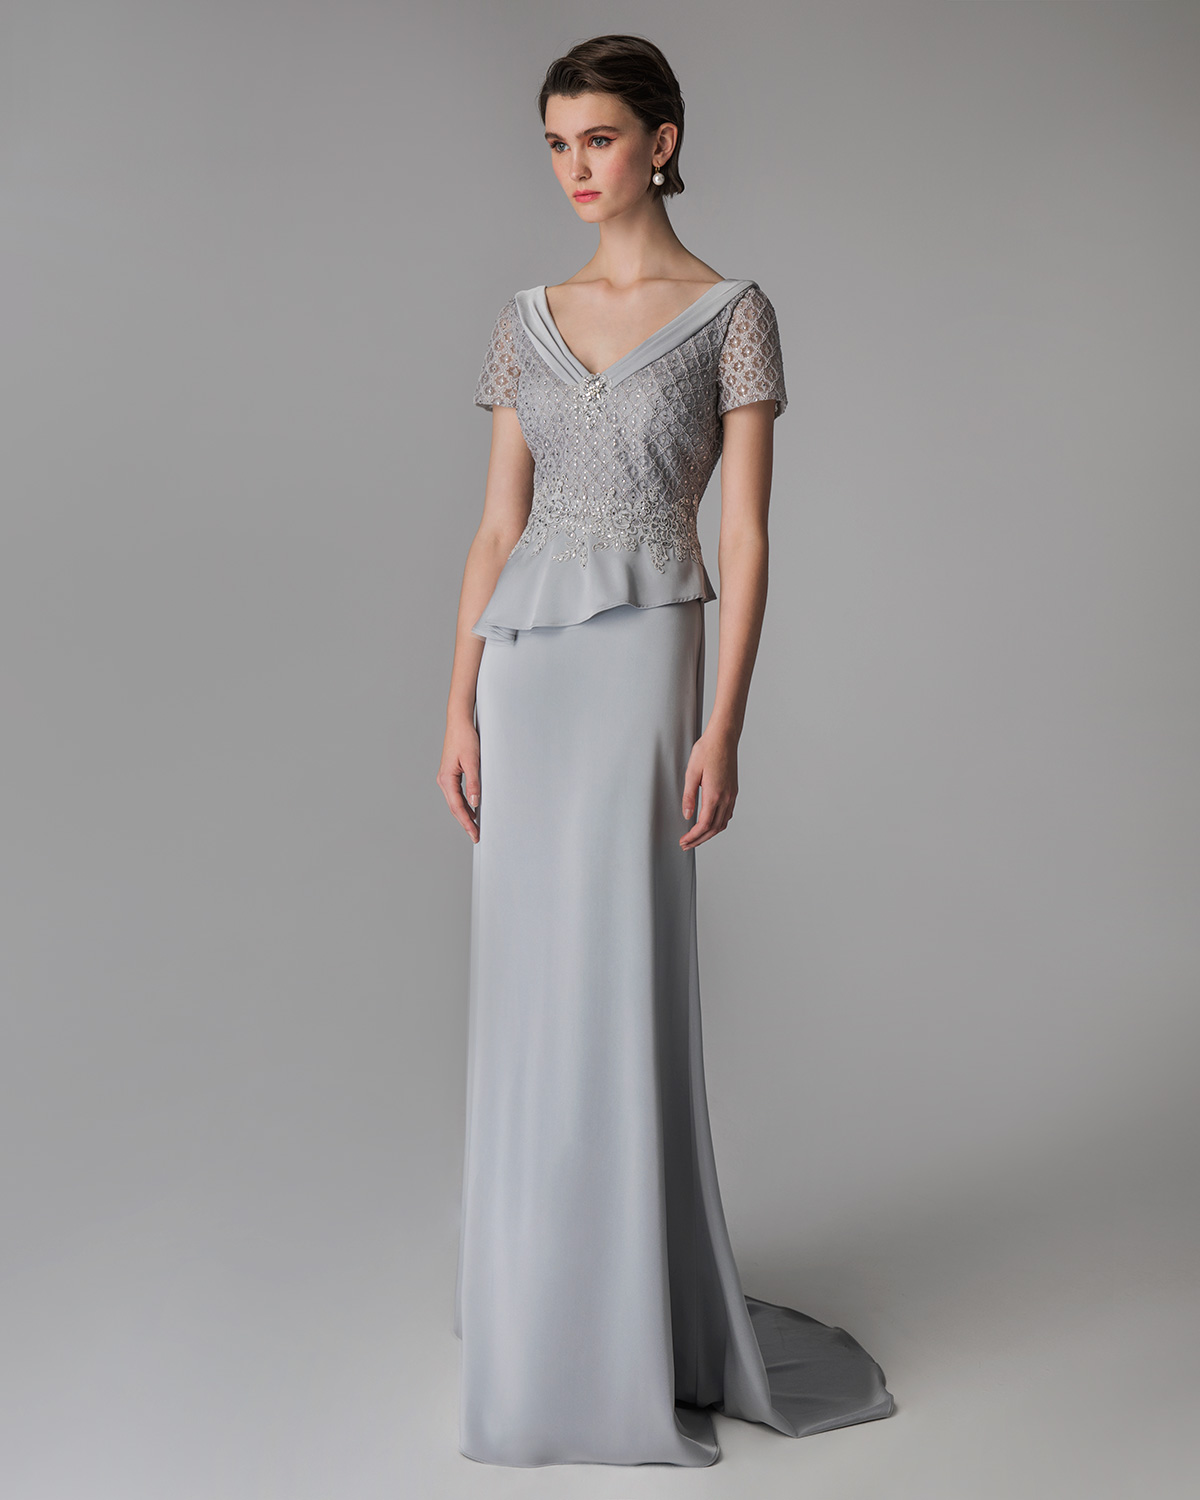 Long evening dress with lace top and beading